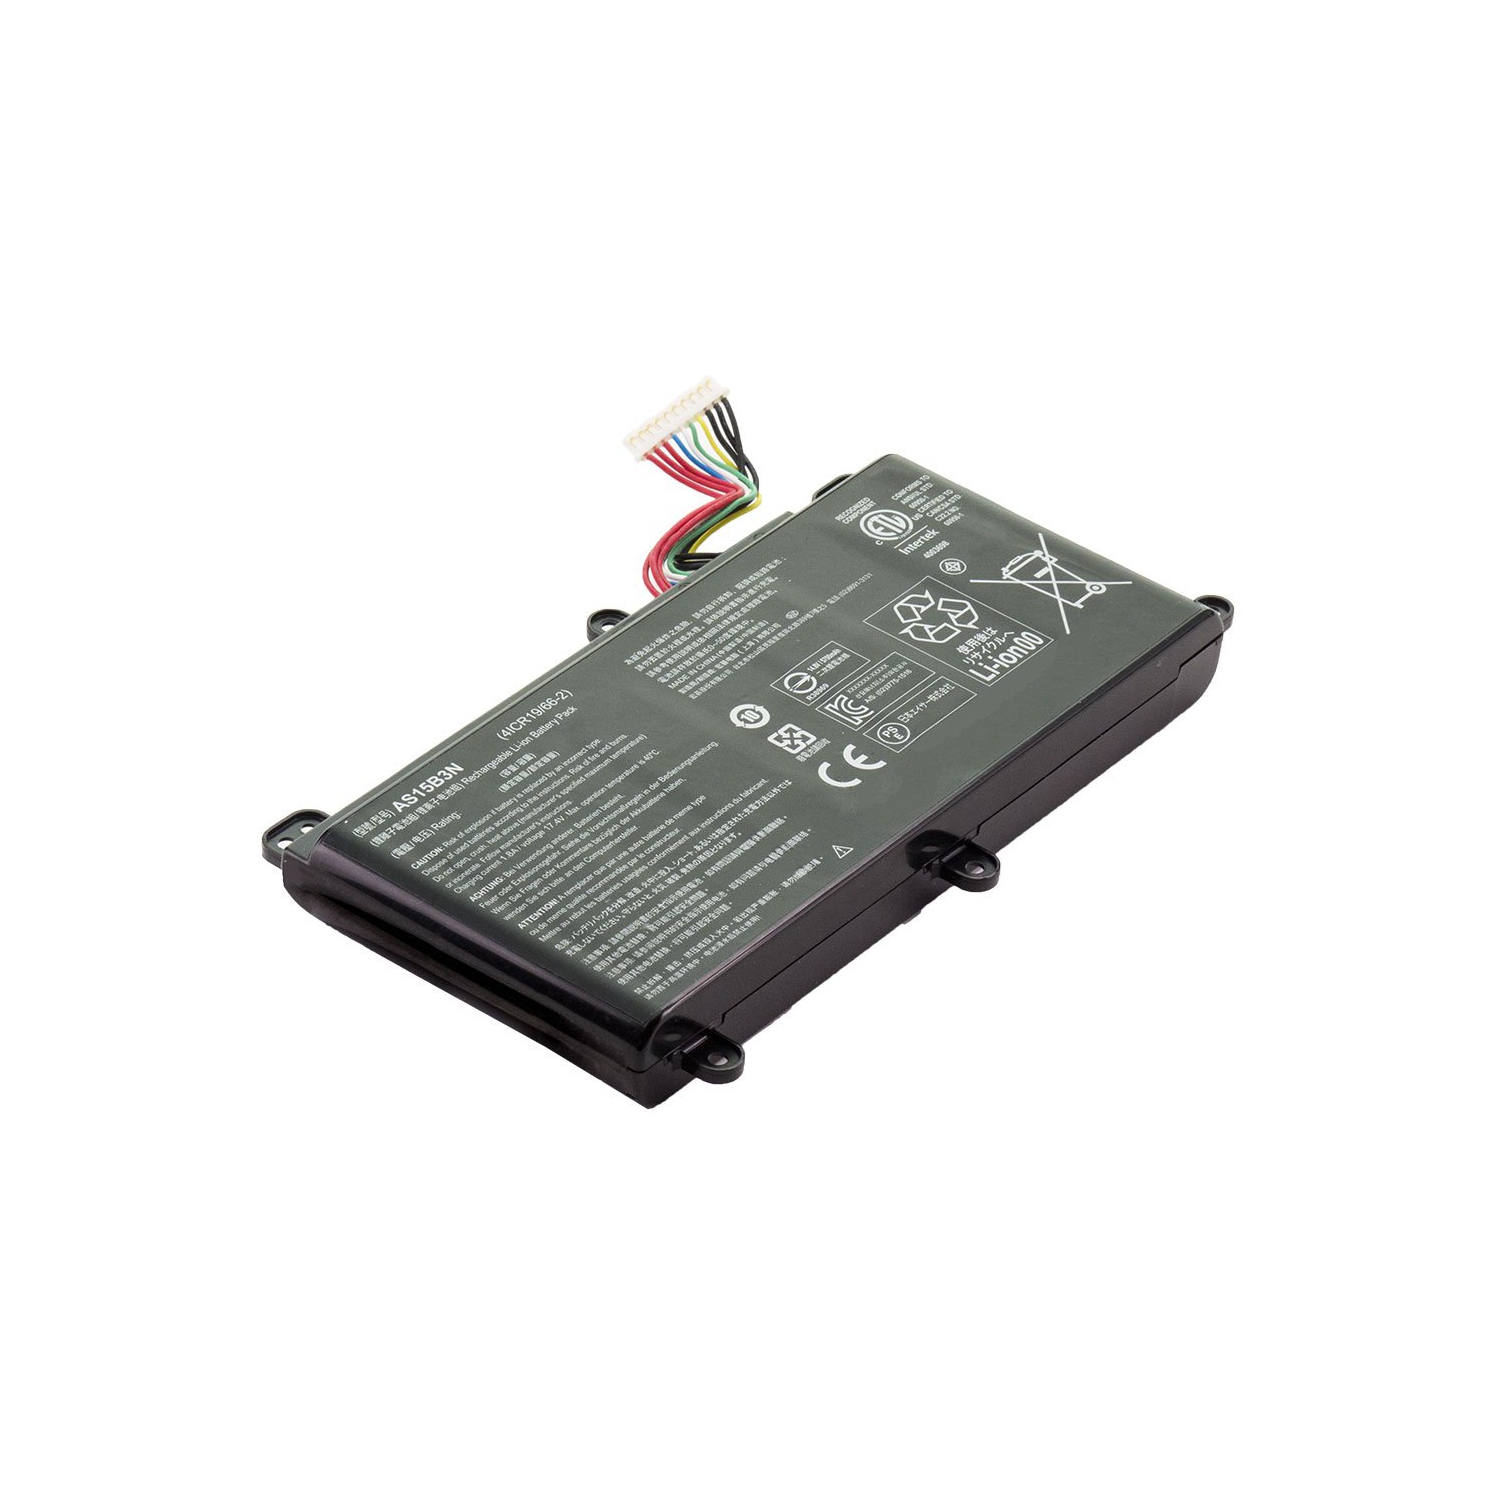 Laptop Battery Replacement for Acer Predator 15 G9-593-73N6, AS15B3N, KT.00803.004, KT.00803.005